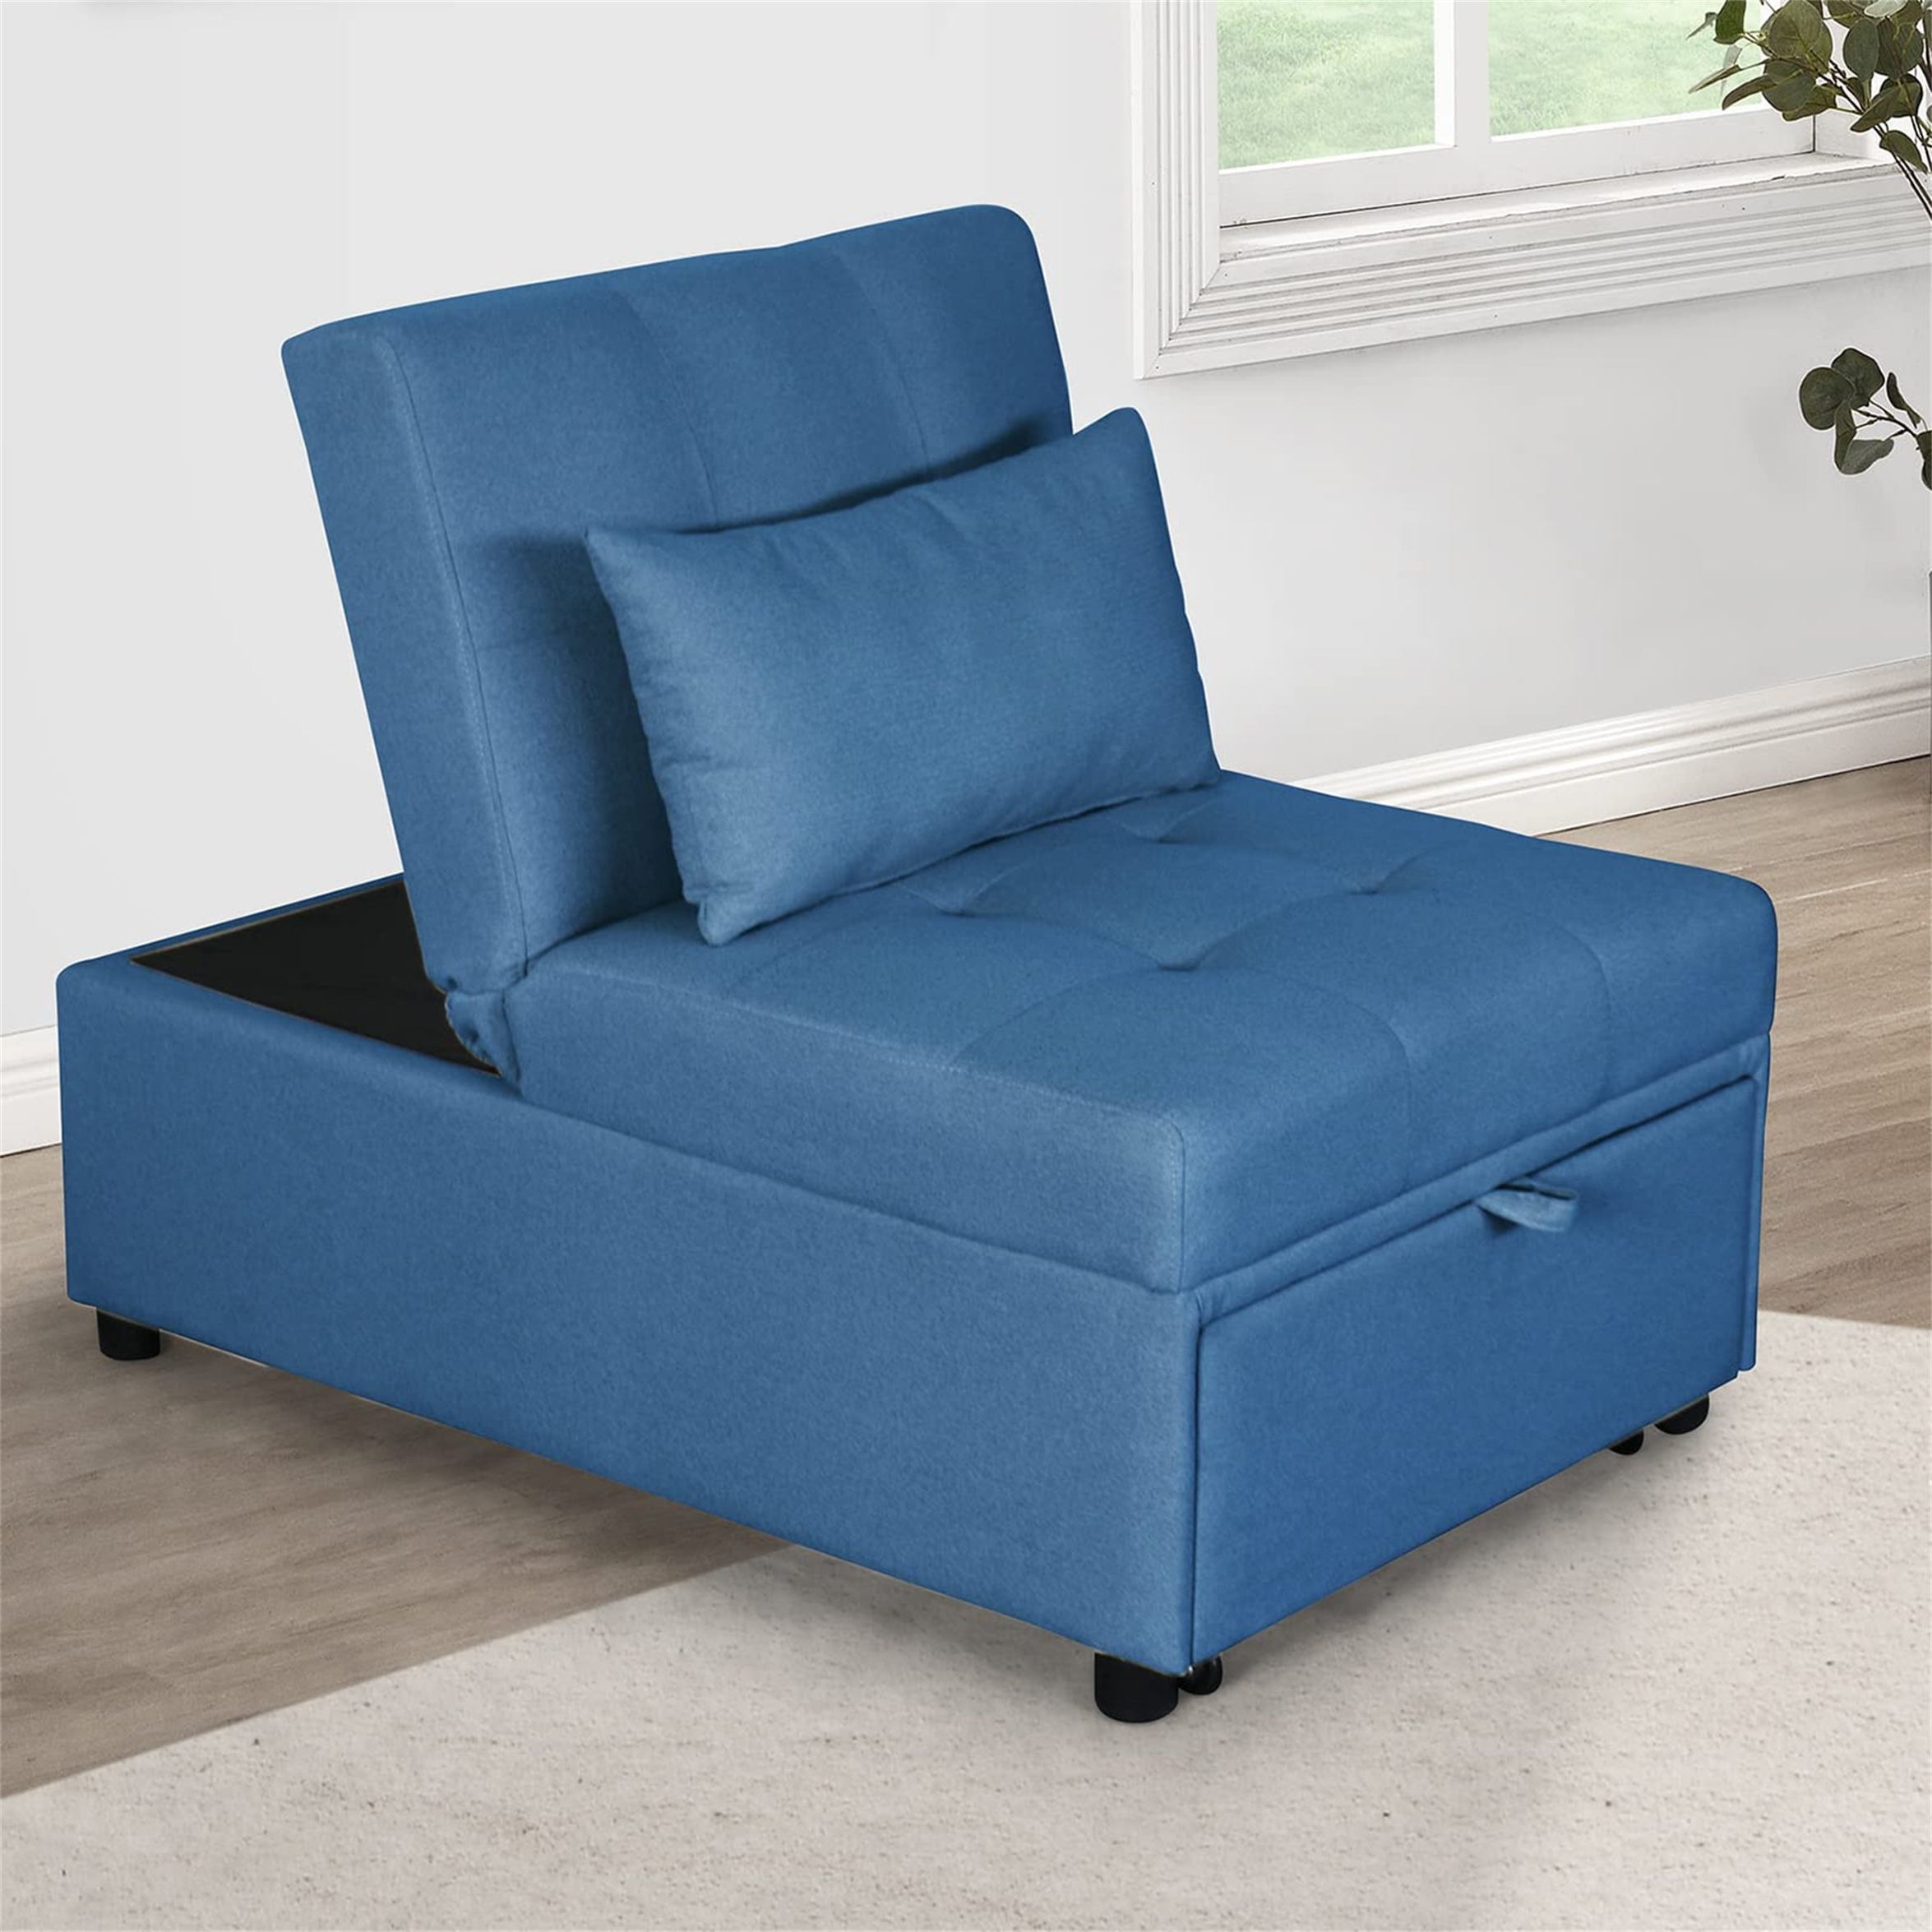 Preferred Blue Folding Bed Ottomans With Aukfa Convertible Chair Bed  4 In 1 Multi Functional Folding Ottoman Bed  Single Sleeper Sofa Chaise Lounge  Blue – Walmart (View 1 of 15)